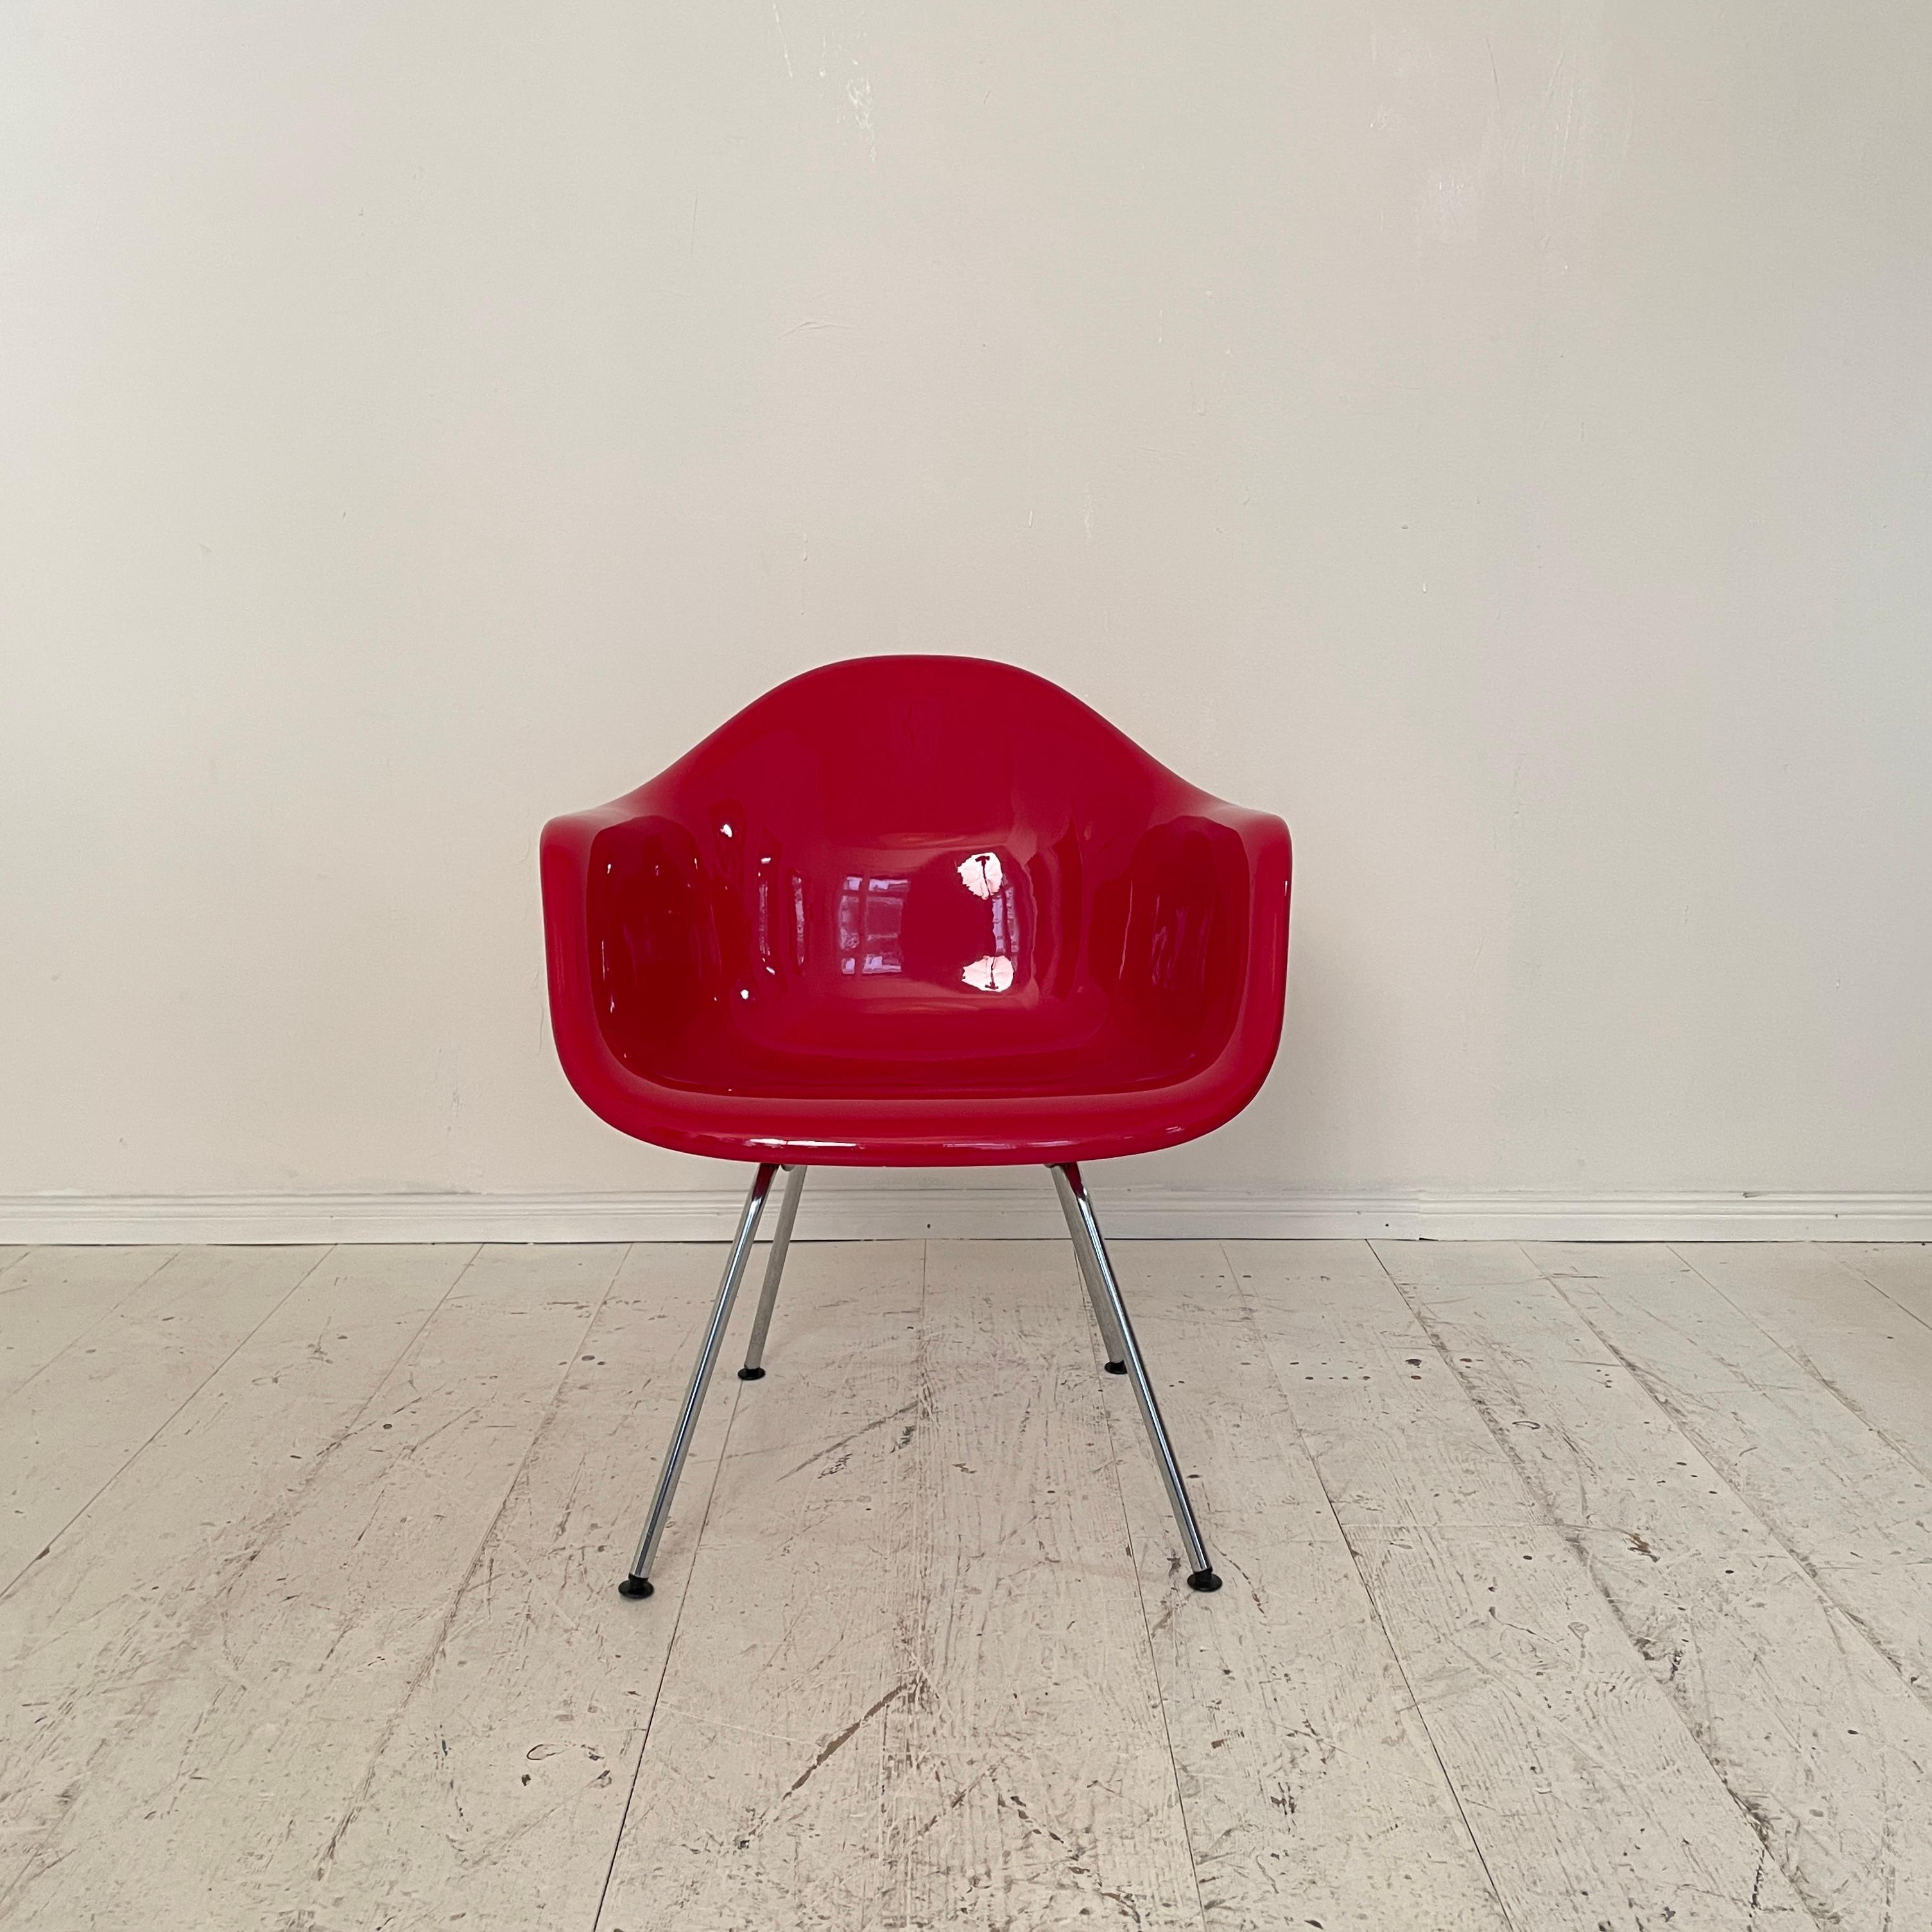 Beautiful rare Dax Lounge Chair with the H-leg frame. 
This Version is a bit little lower than the other models.
Only 42cm high instead of 45cm. 
The fiberglass shell is powder coated in a great red. The chair is in a great original condition. The